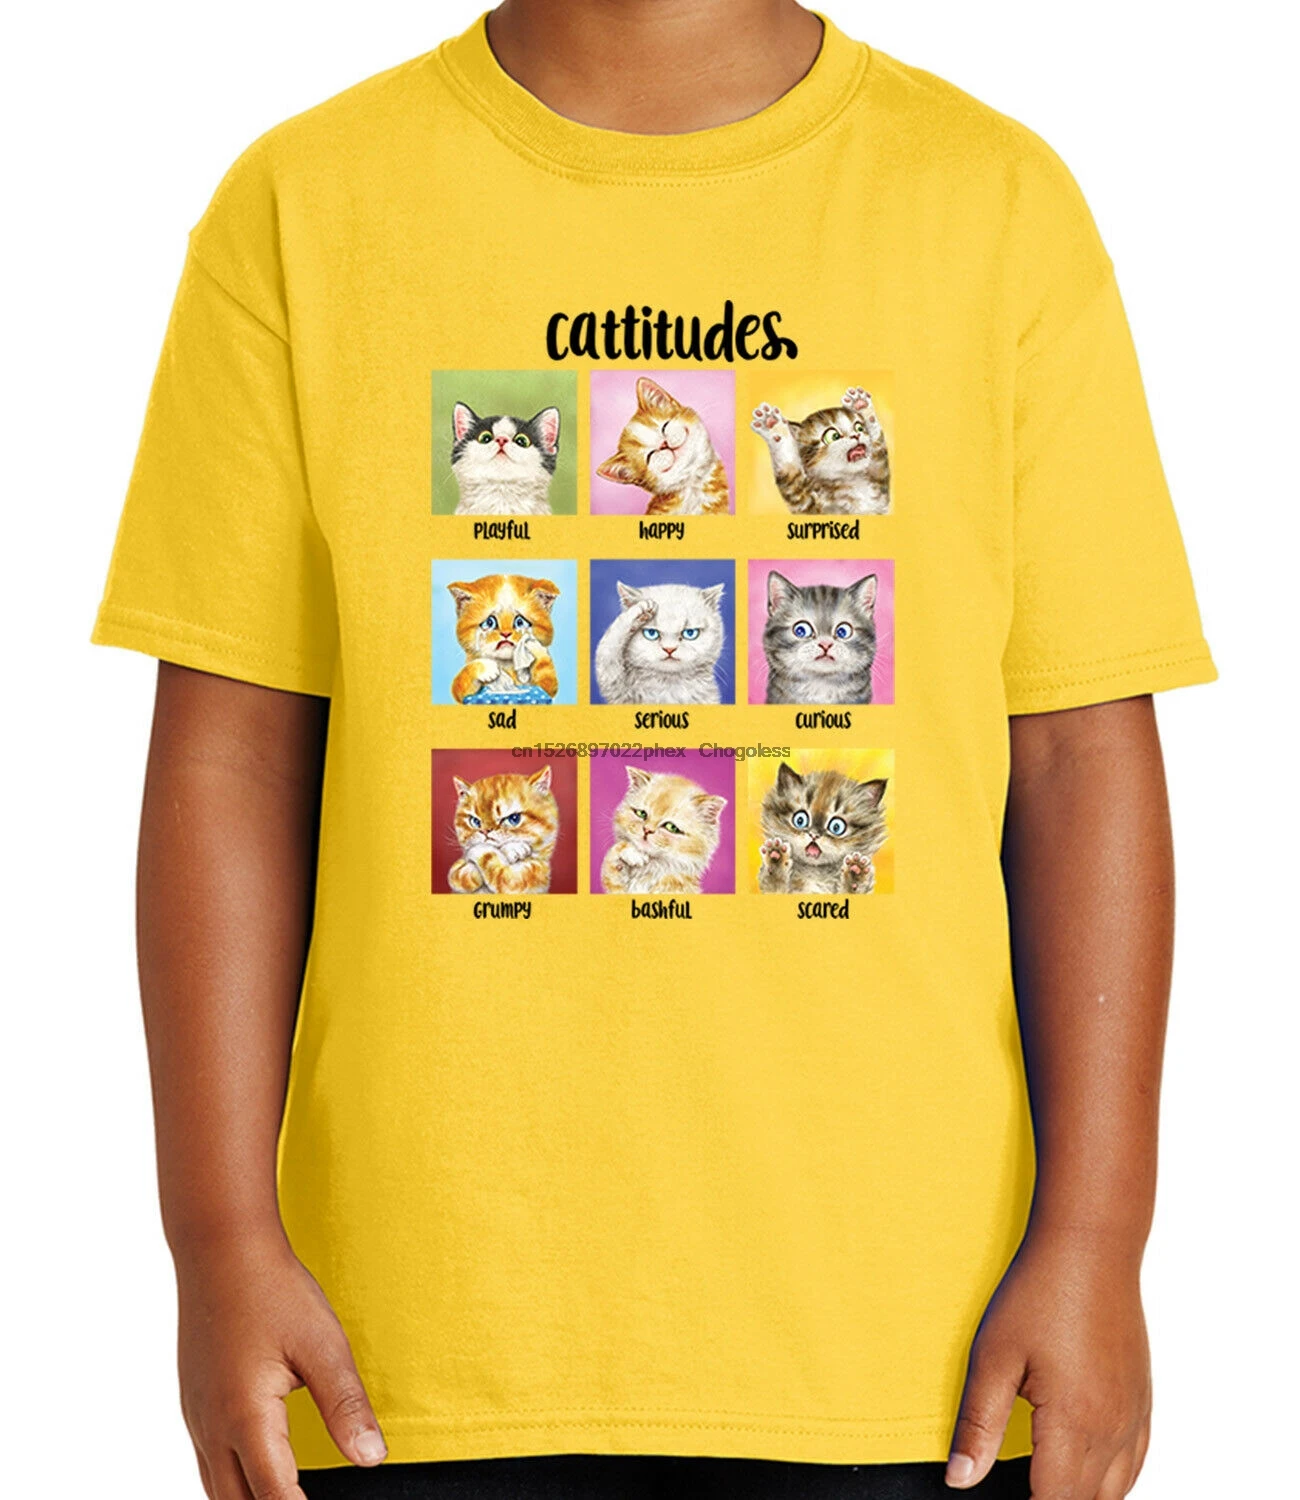 Cattitudes Kid's T-shirt Happy surprised sad curious Cat Tee for Youth 2100C 